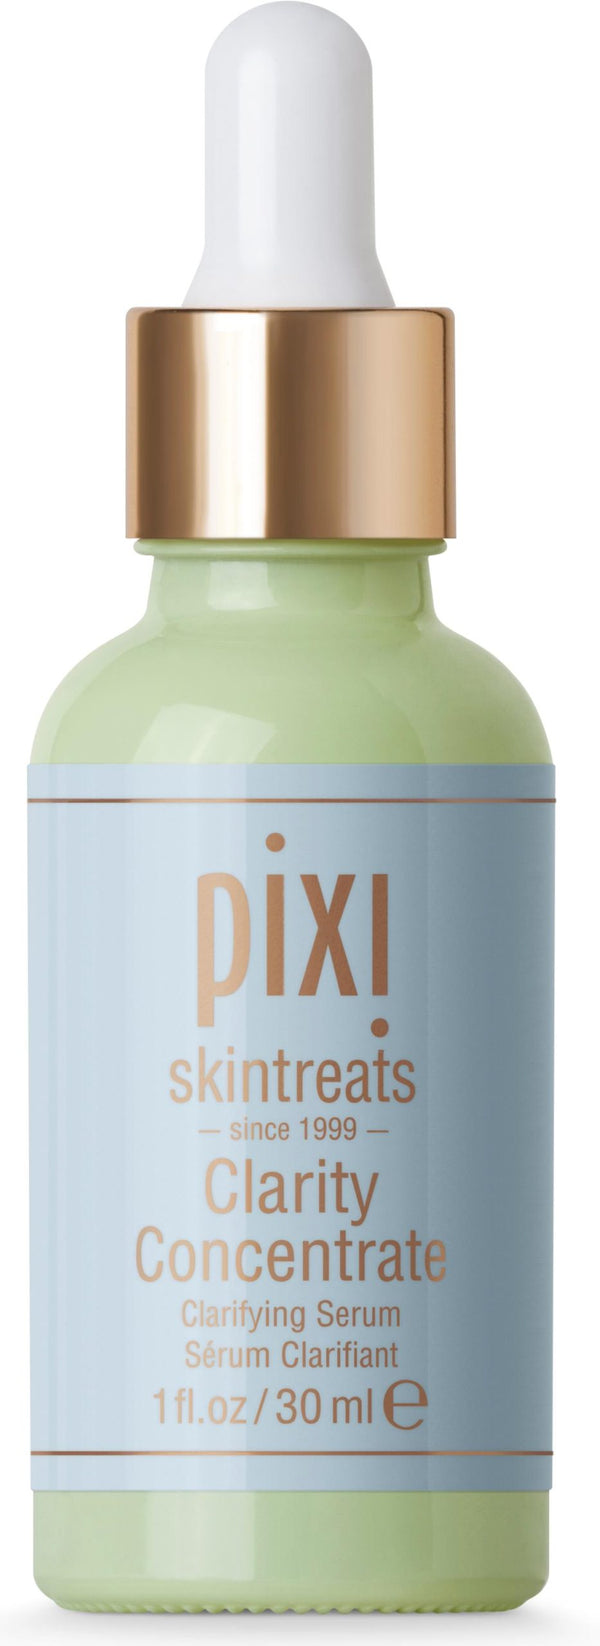 Pixi Clarity Concentrate 30 ml